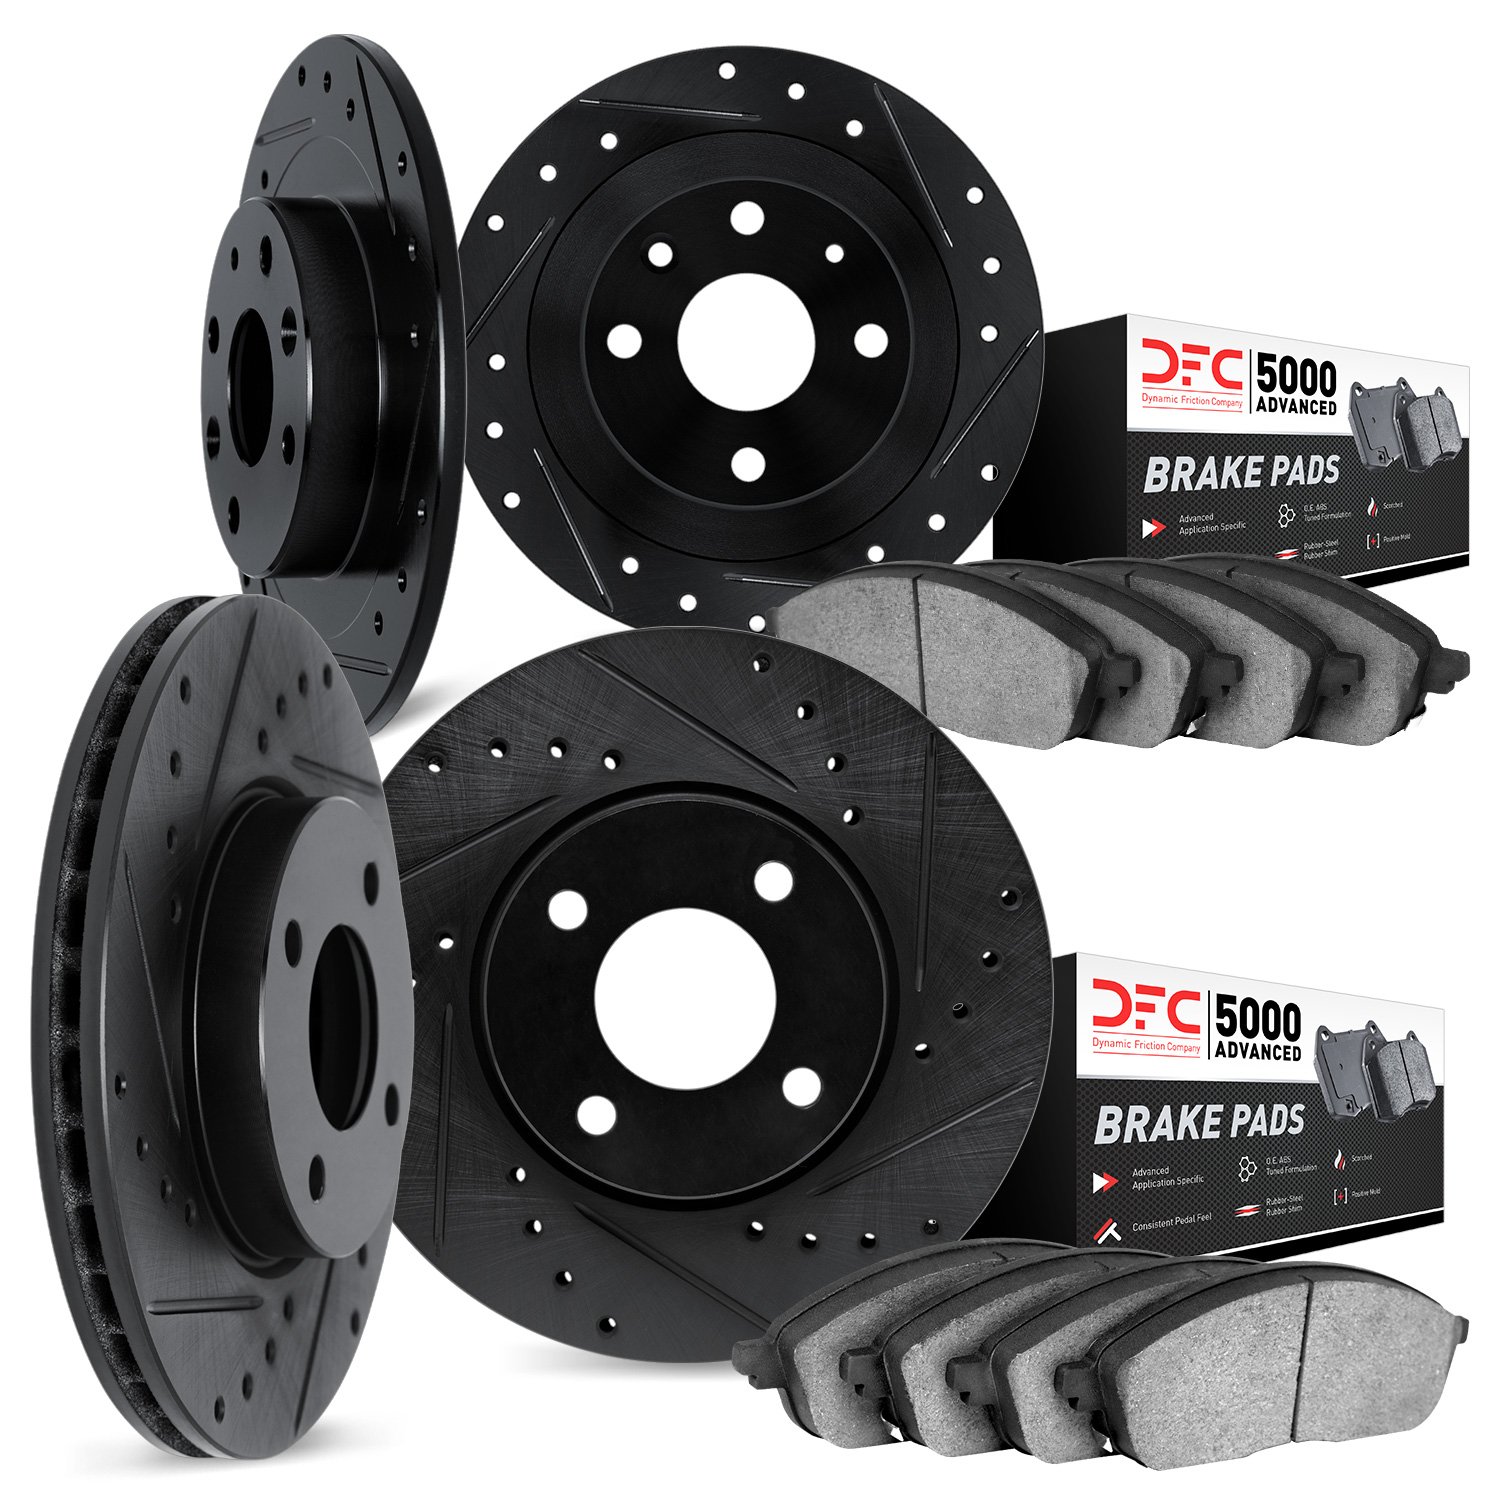 8504-58002 Drilled/Slotted Brake Rotors w/5000 Advanced Brake Pads Kit [Black], 1988-1988 Acura/Honda, Position: Front and Rear